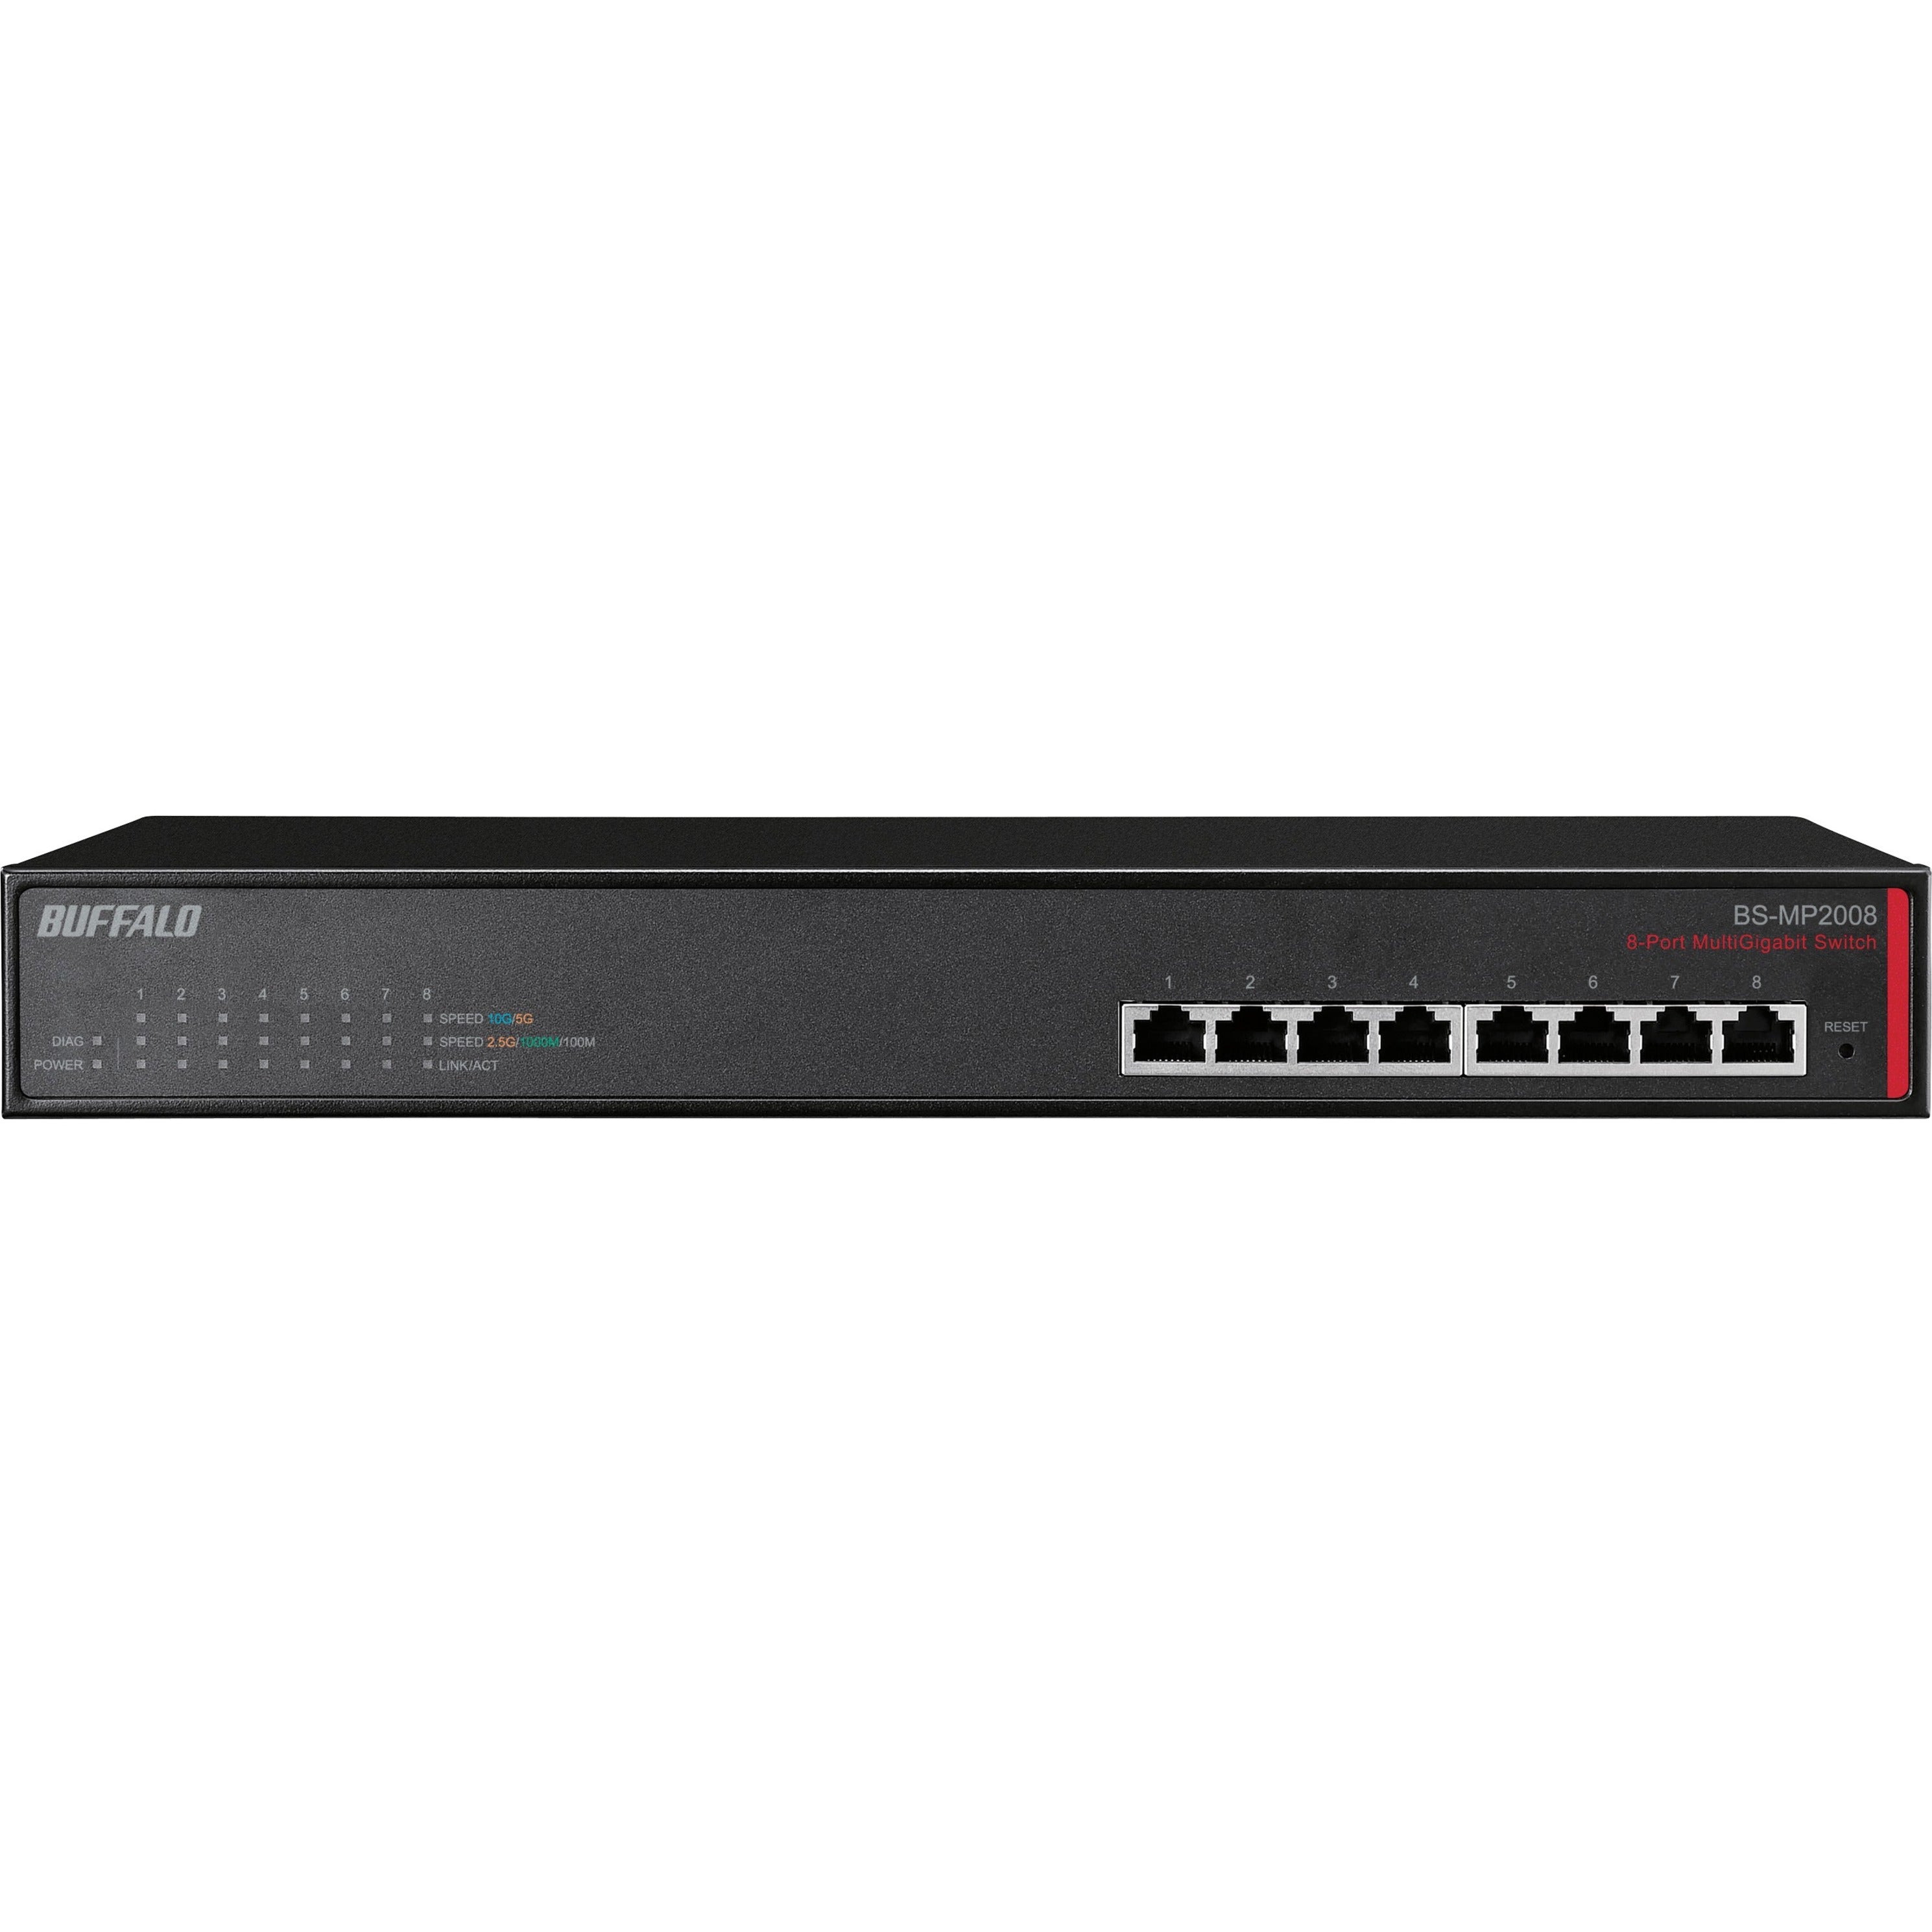 Buffalo BS-MP2008 8-Port 10 Gigabit Switch, High-Speed Ethernet Networking Solution